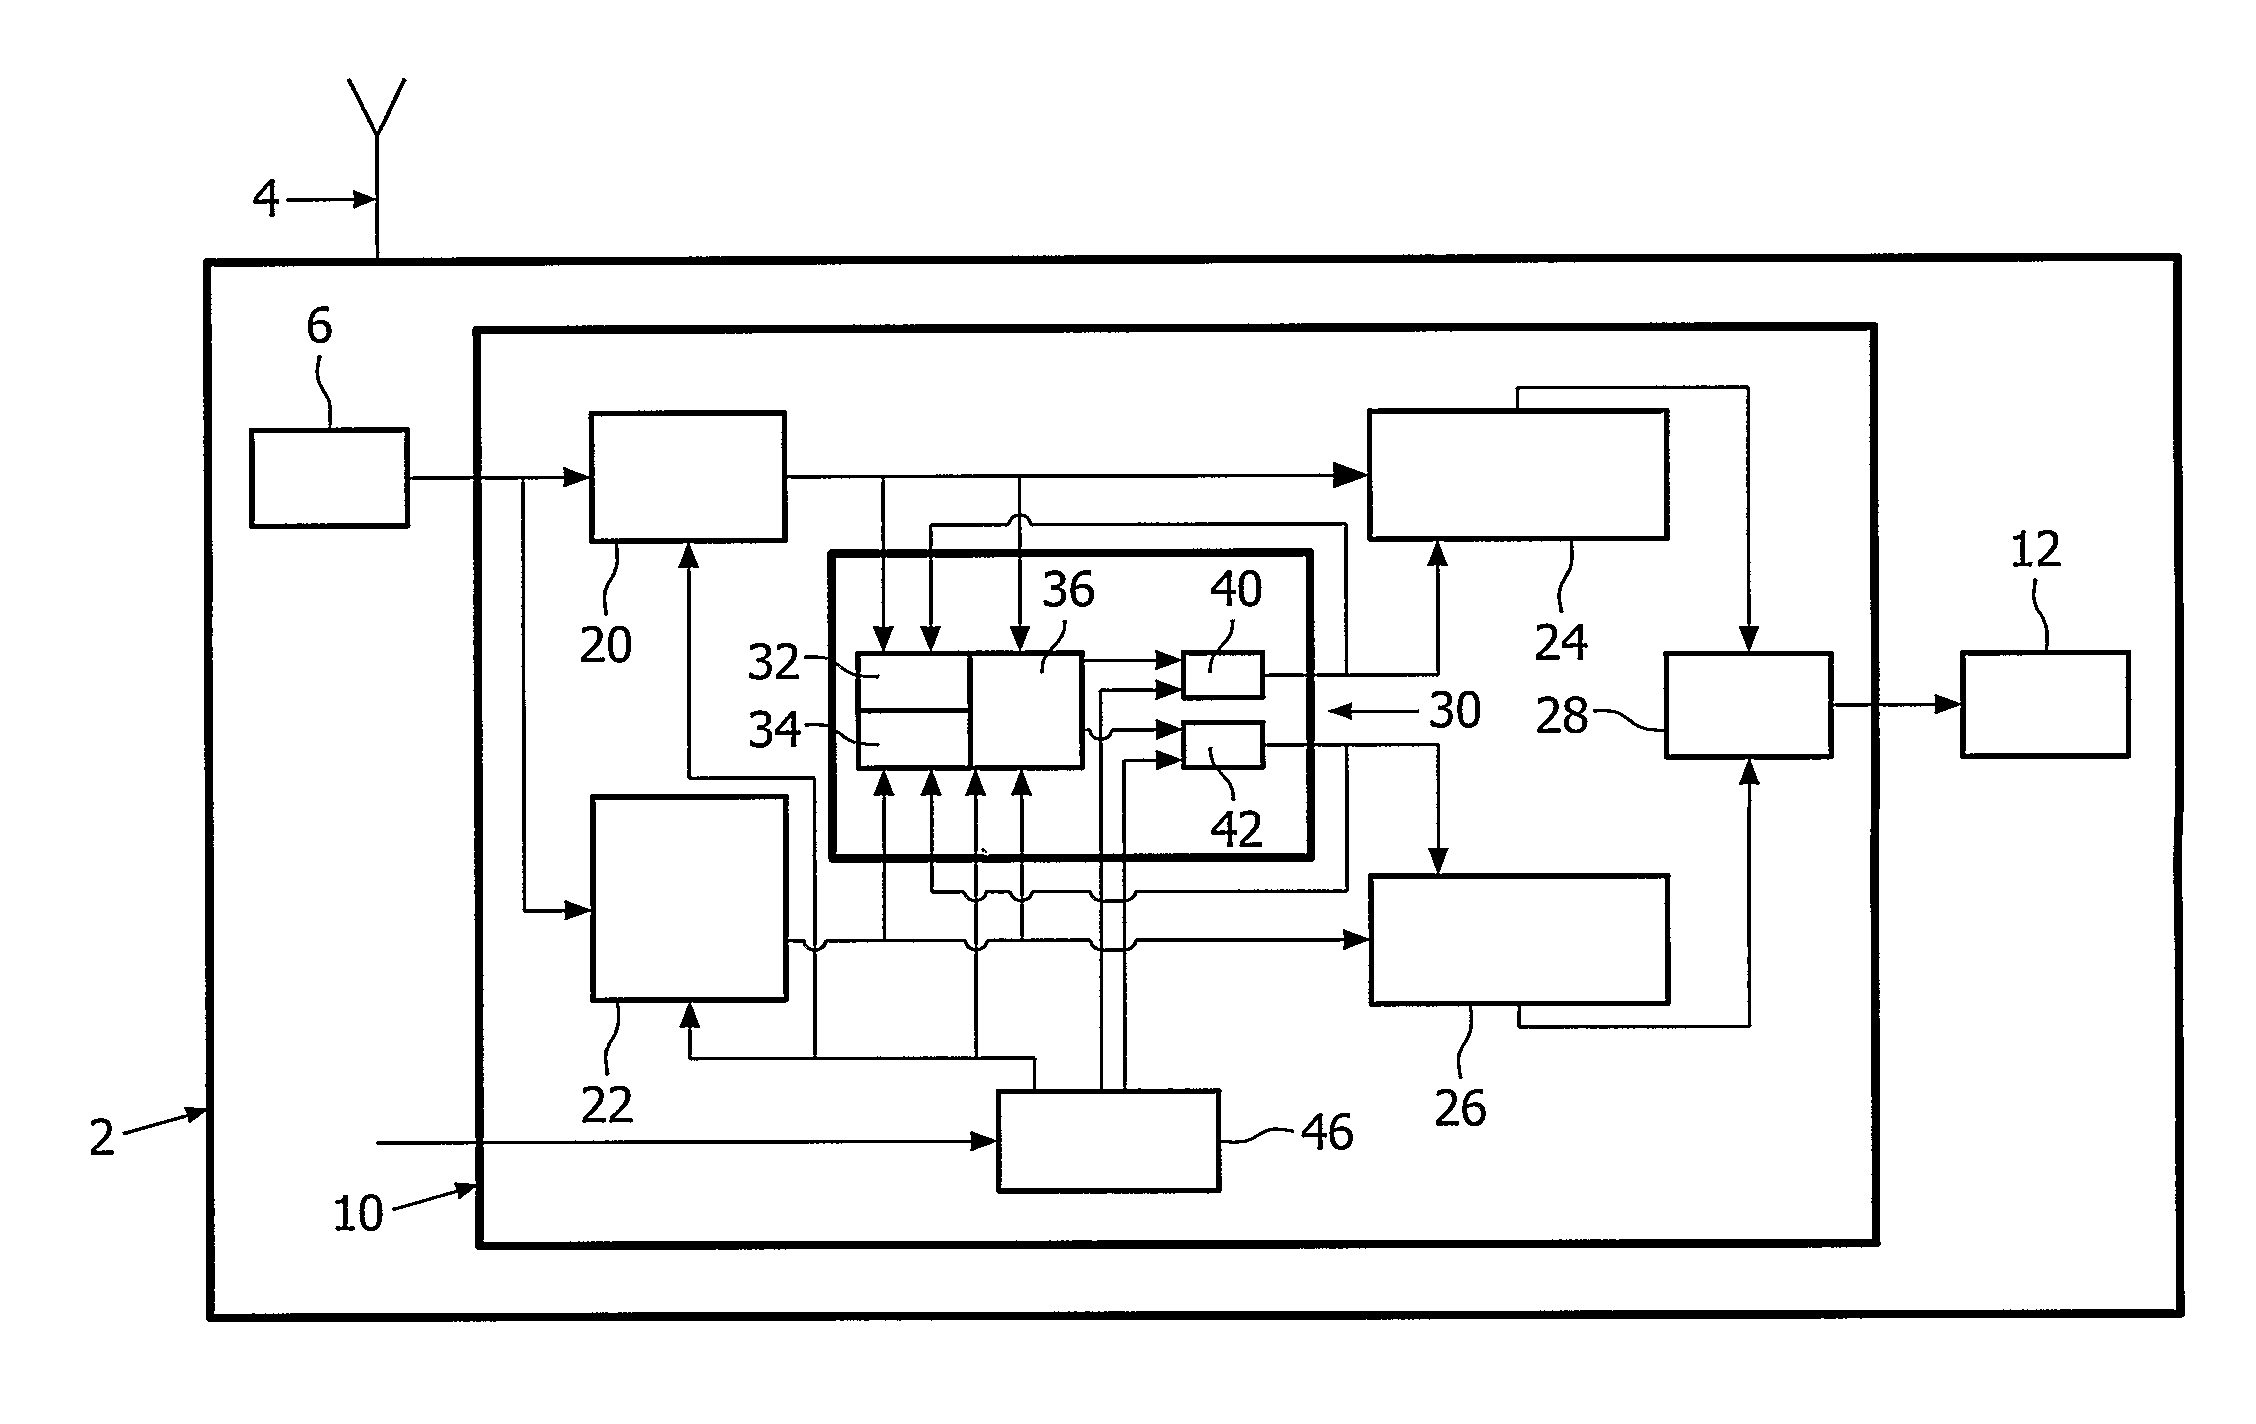 Method and a system for generating an adaptive slicer threshold